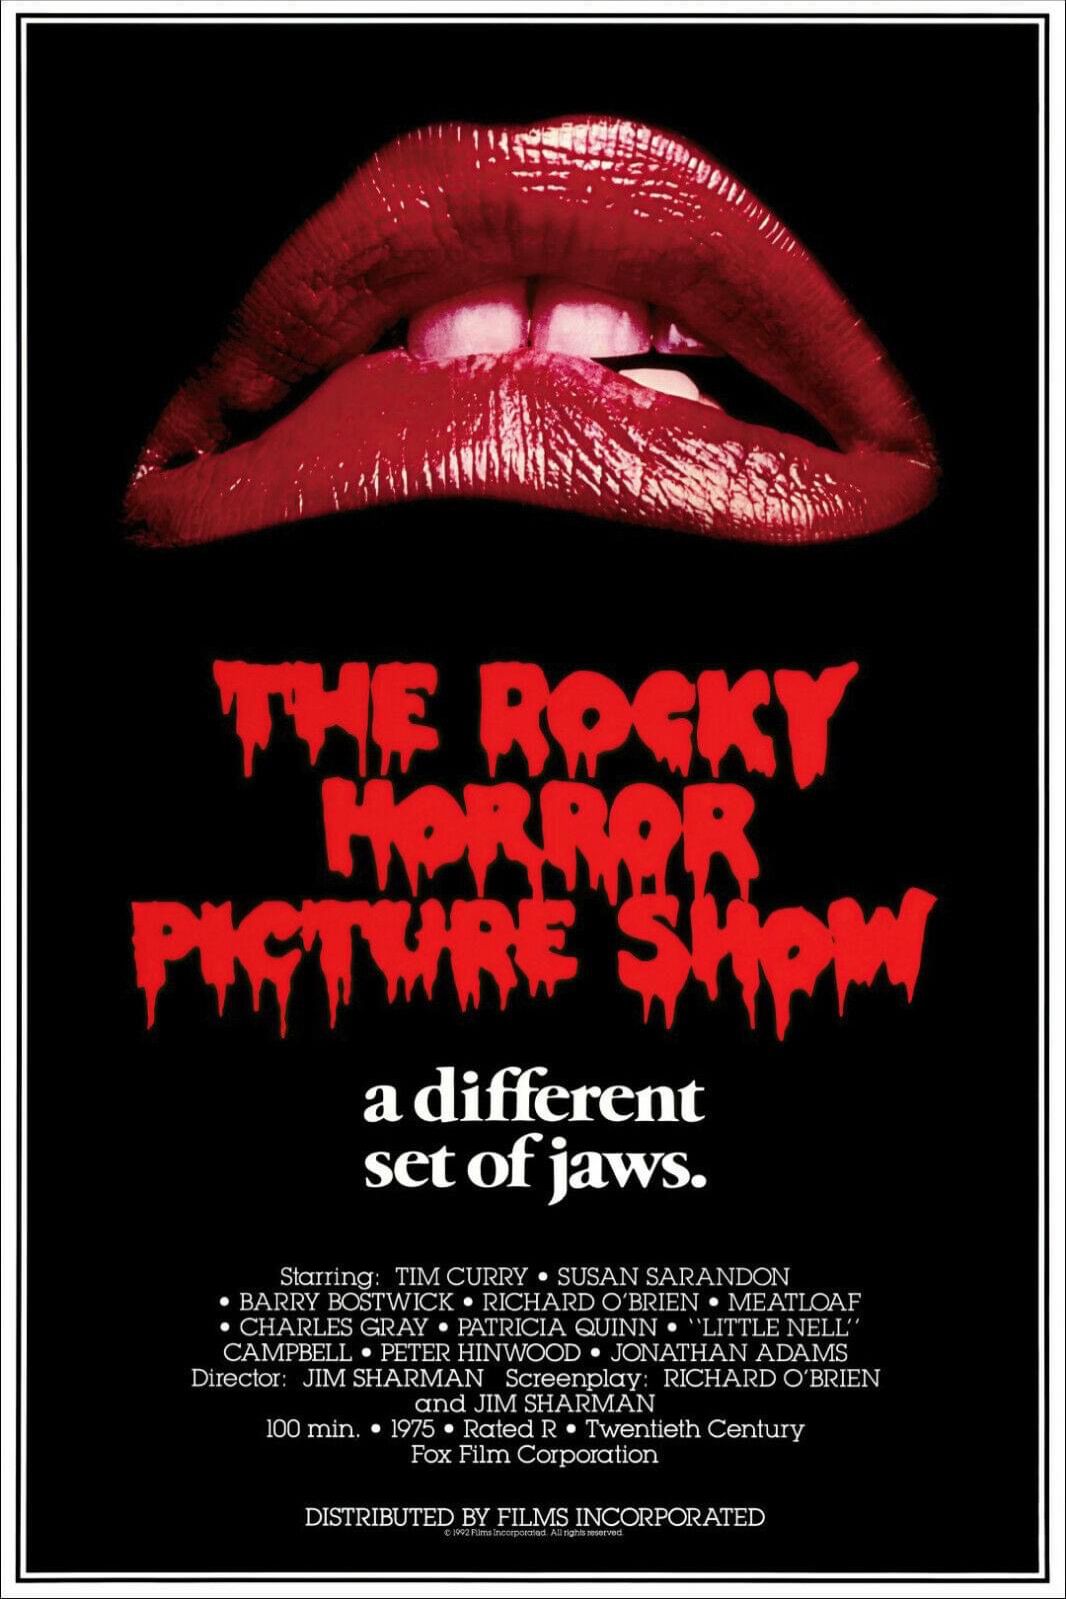 The Rocky Horror Picture Show Showtimes | Round Rock